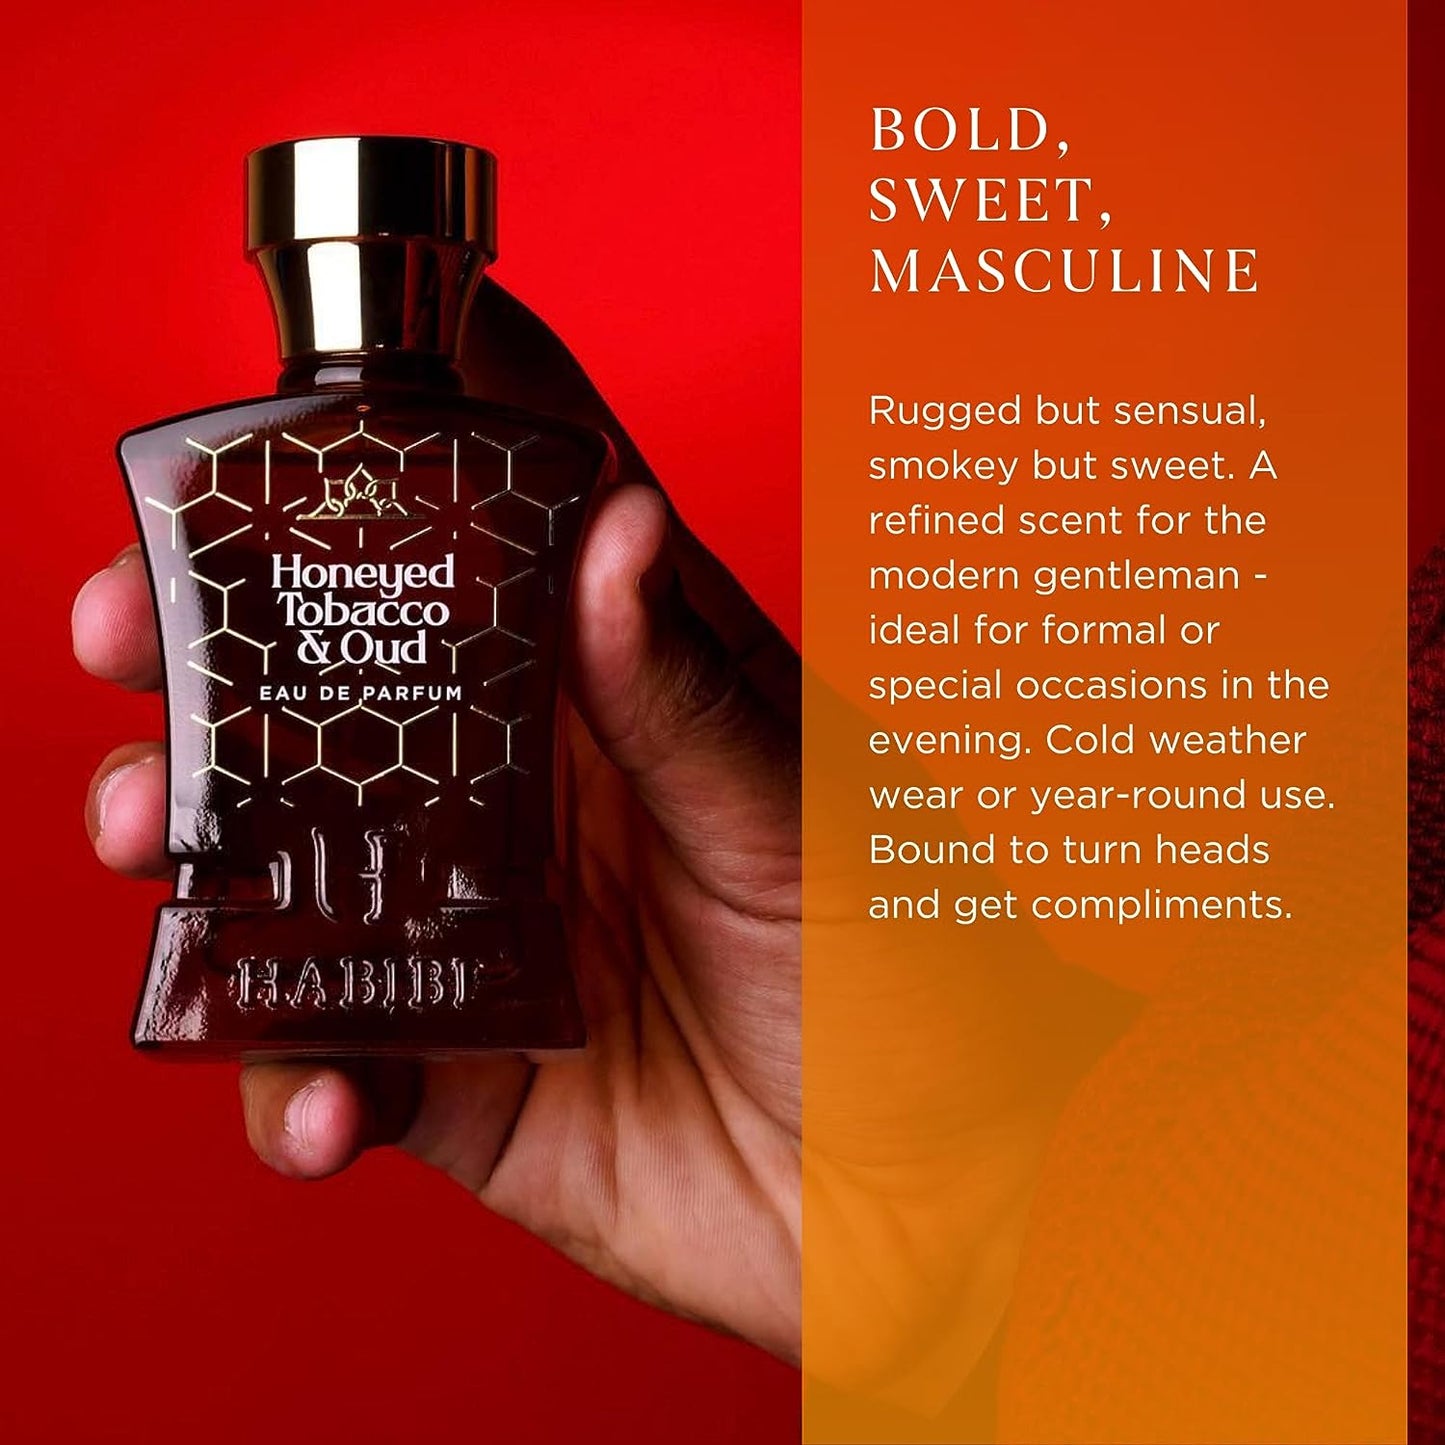 Honeyed Tobacco & Oud- Eau De Parfum for Men Long-Lasting Oud Cologne. Woody, Smokey, Sweet and Unique. Made with Rare Exotic Notes.Made in USA